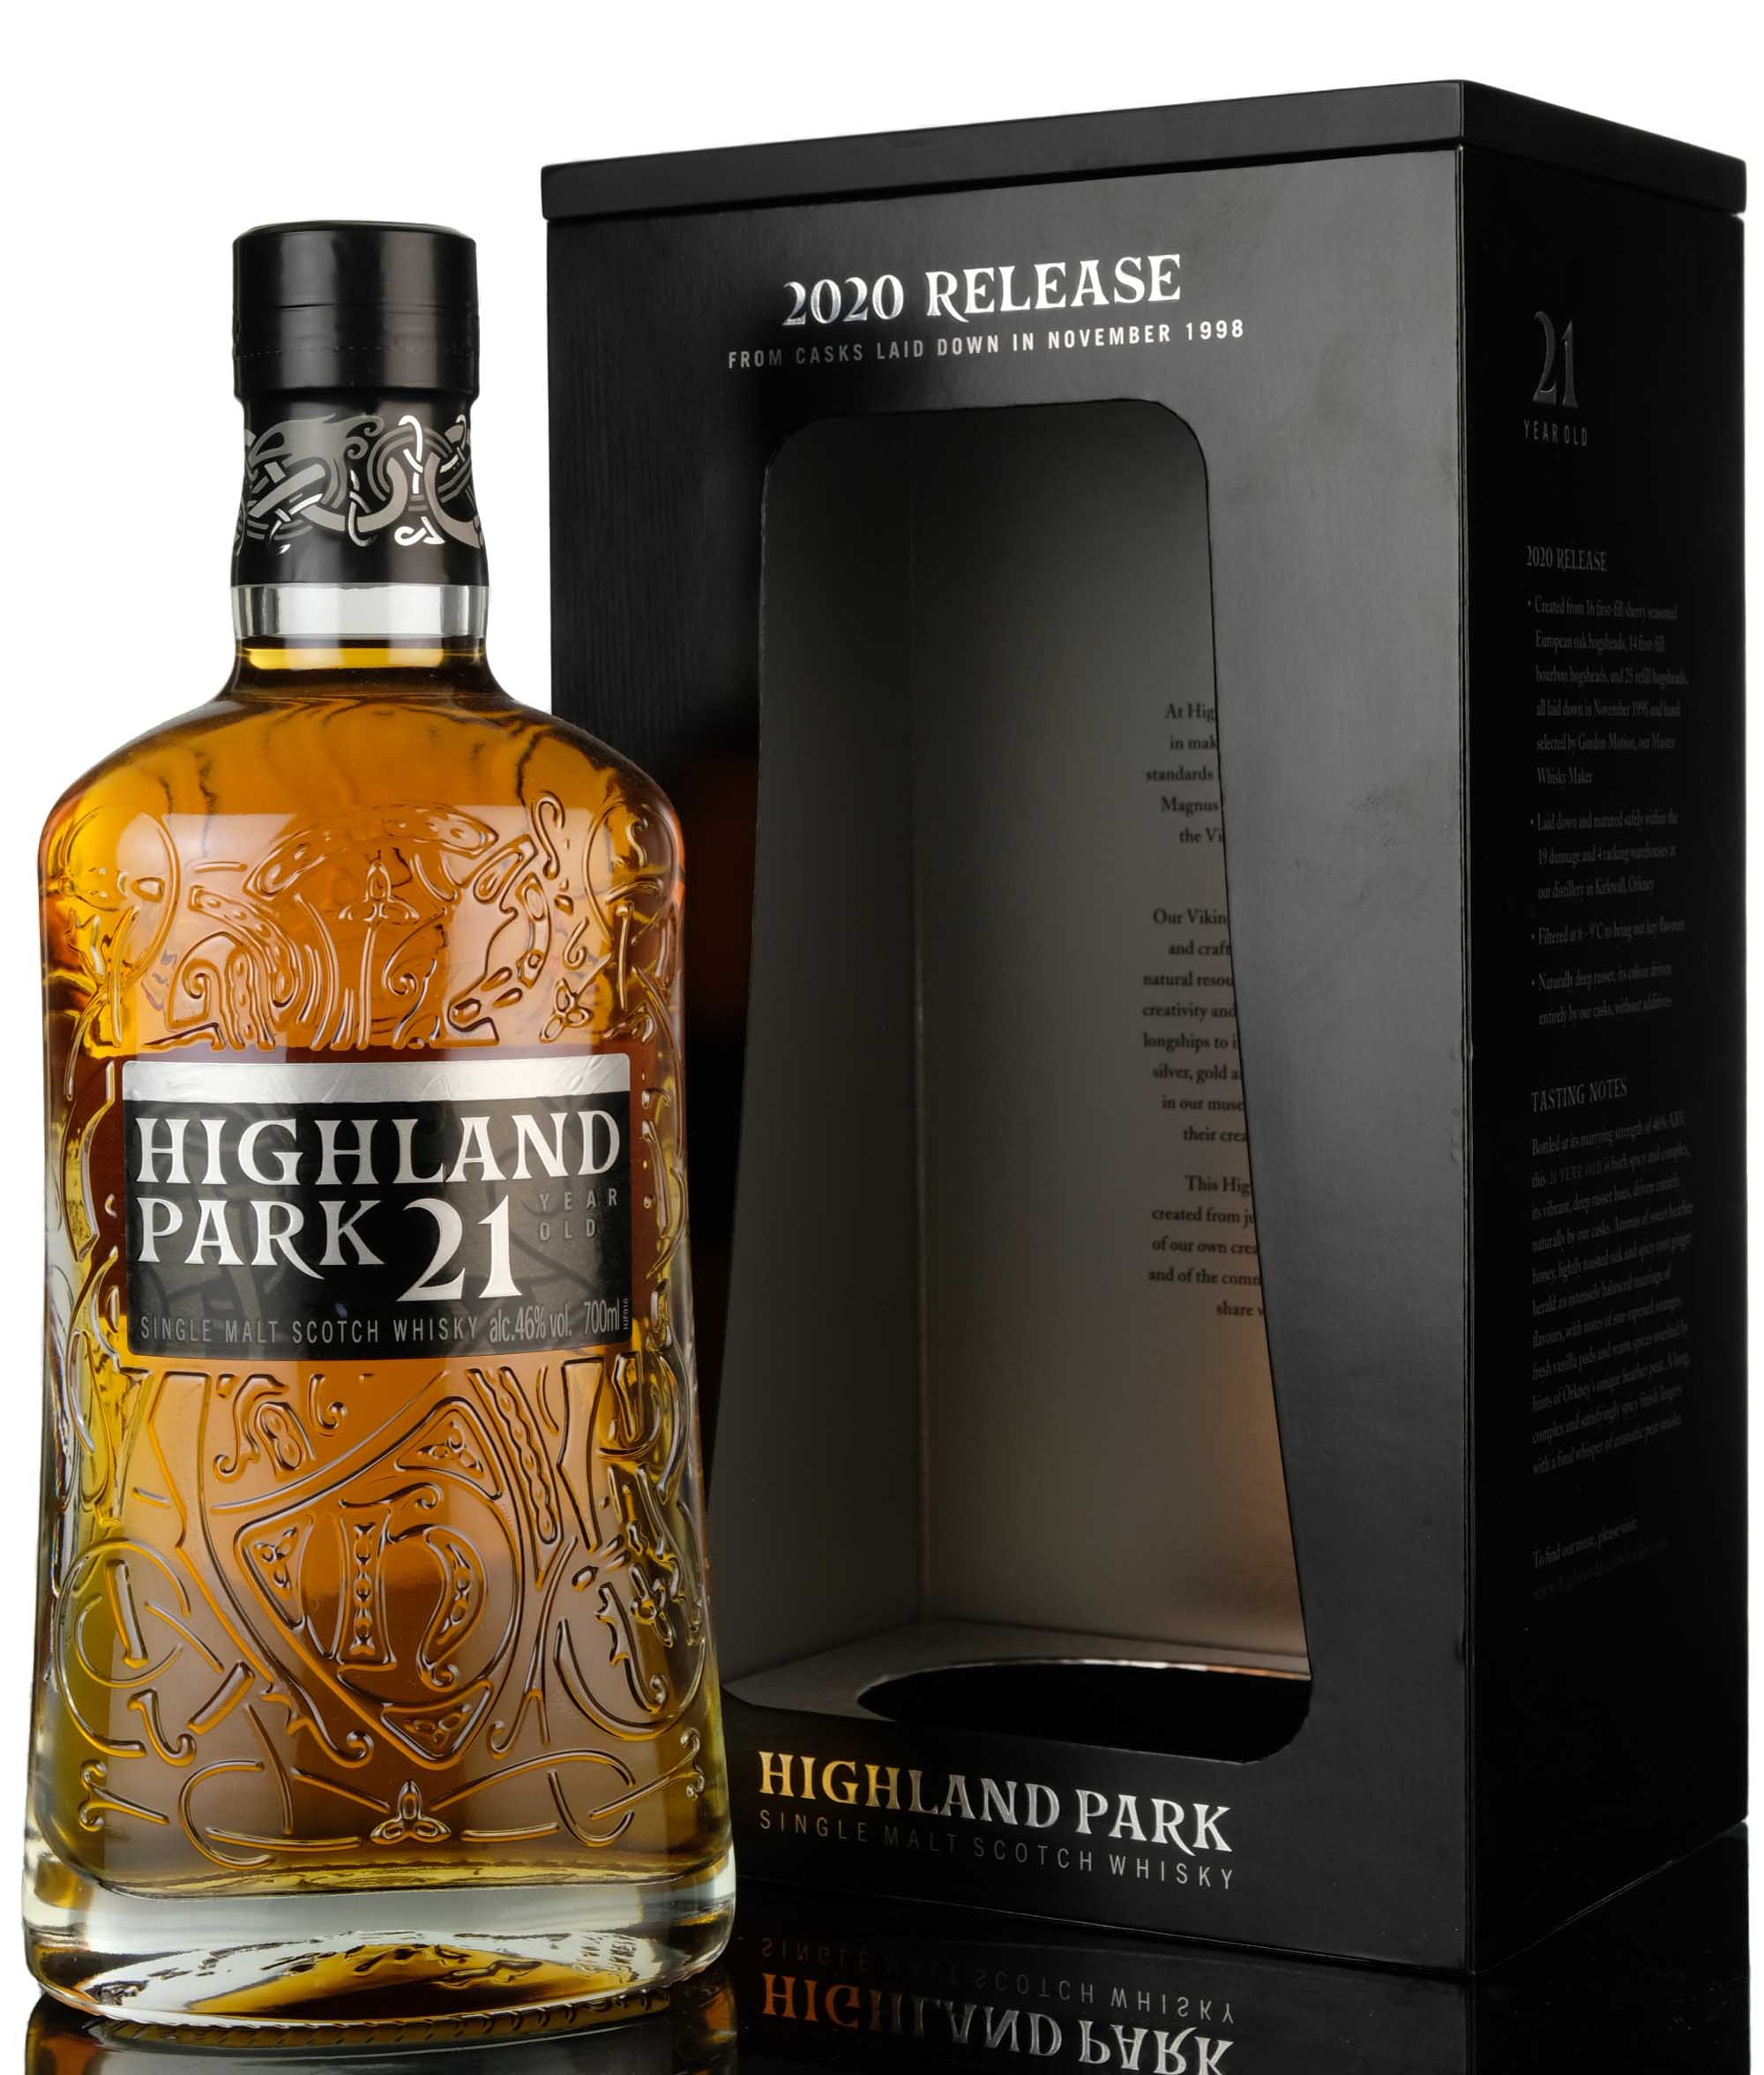 Highland Park 1998 - 21 Year Old - 2020 Release